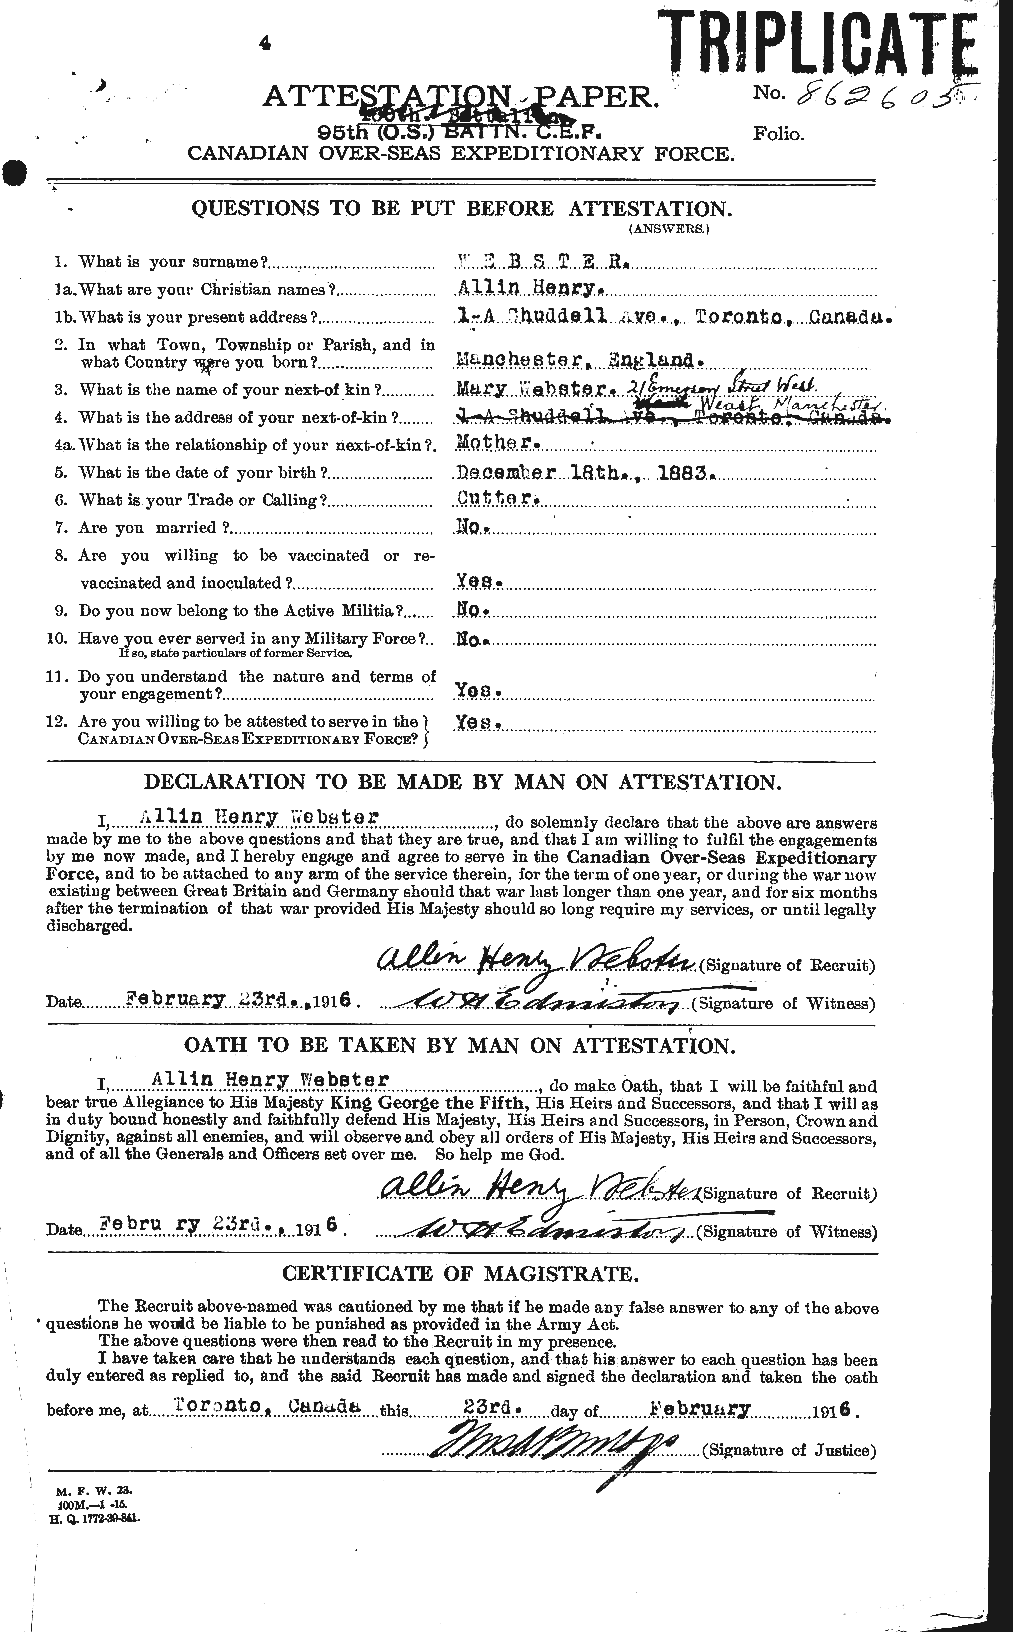 Personnel Records of the First World War - CEF 670246a